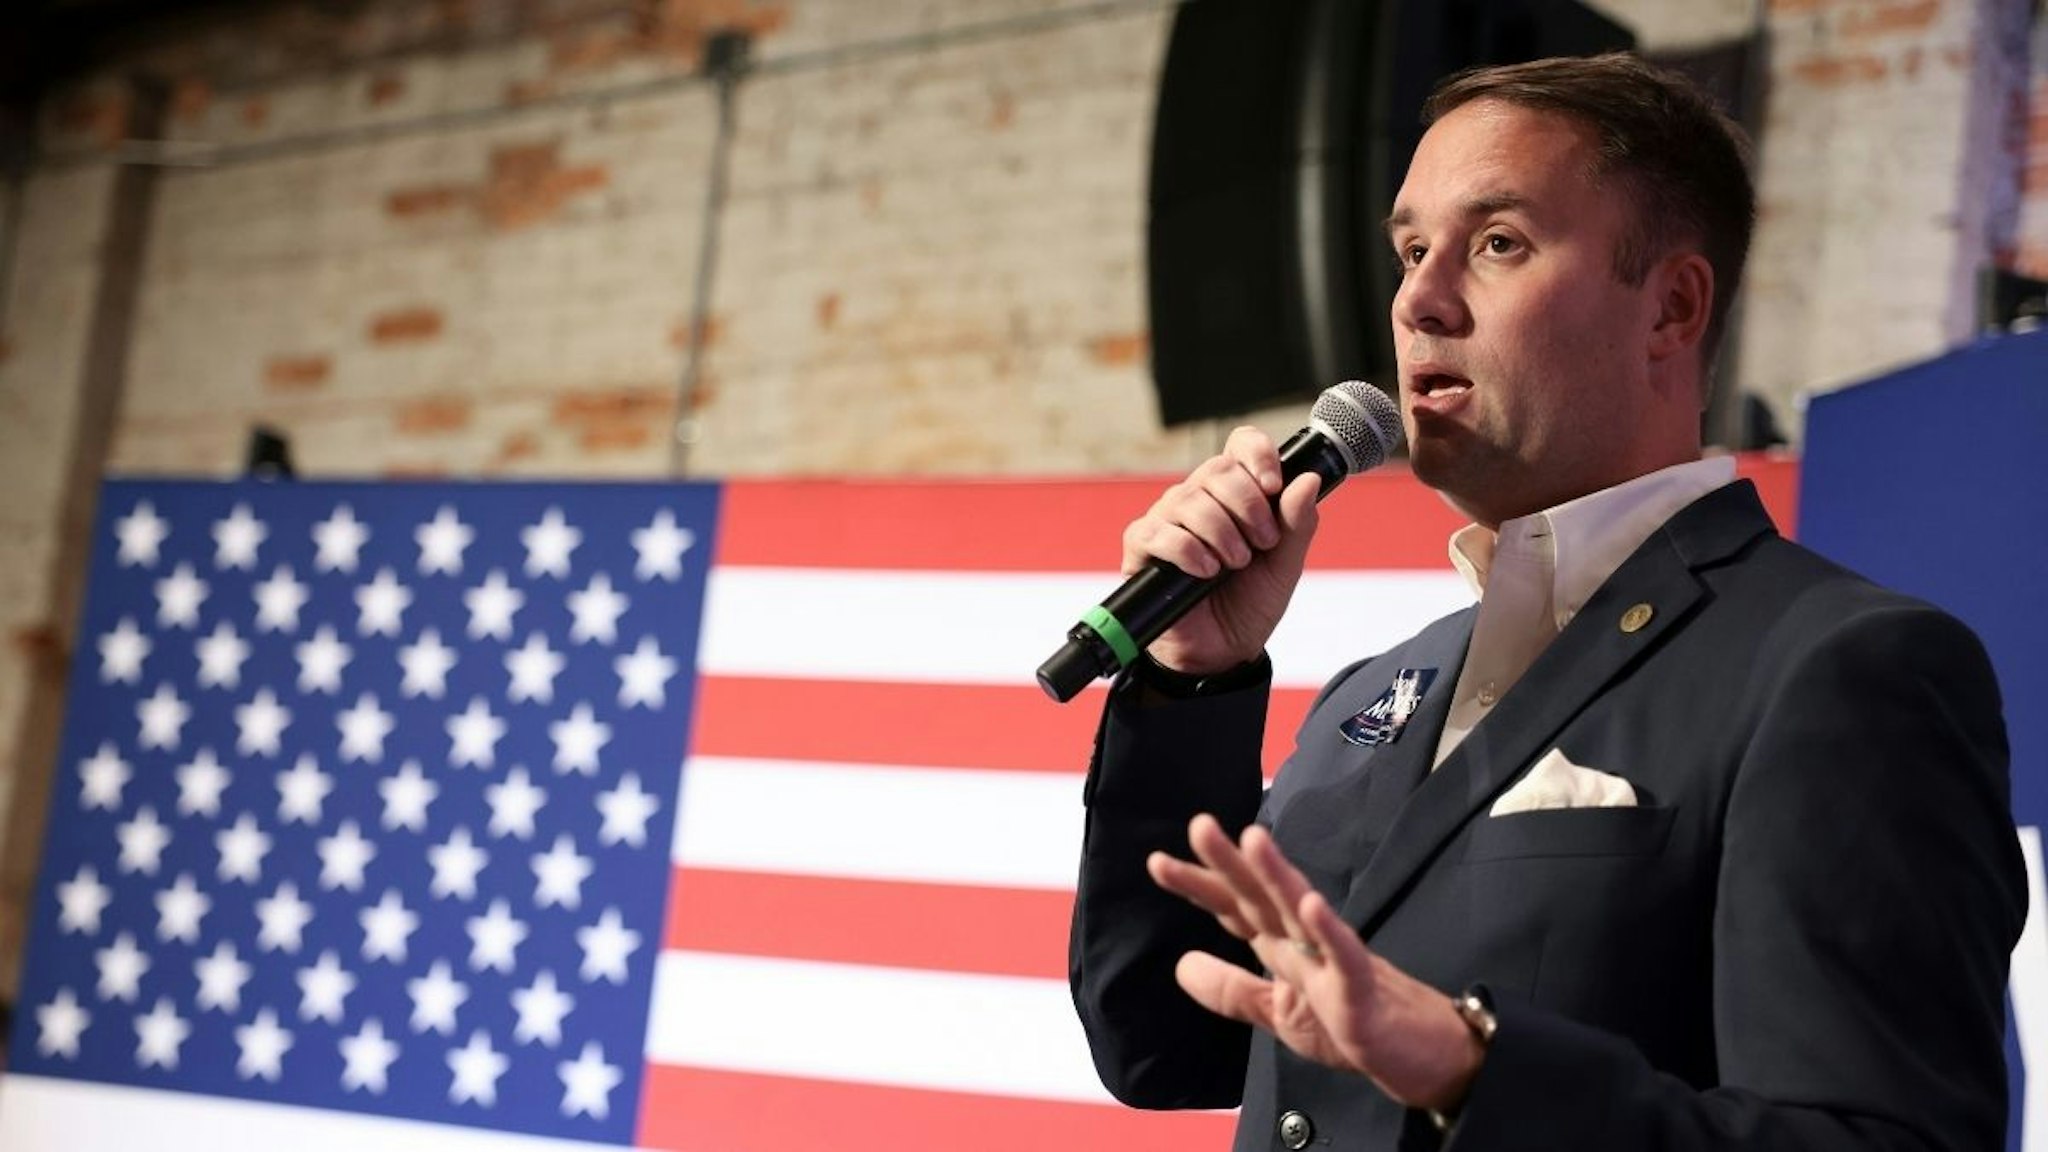 Virginia Republican Attorney General candidate Jason Miyares speaks during a campaign rally for Virginia Republican gubernatorial candidate Glenn Youngkin at the Nansemond Brewing Station on October 25, 2021 in Suffolk, Virginia.